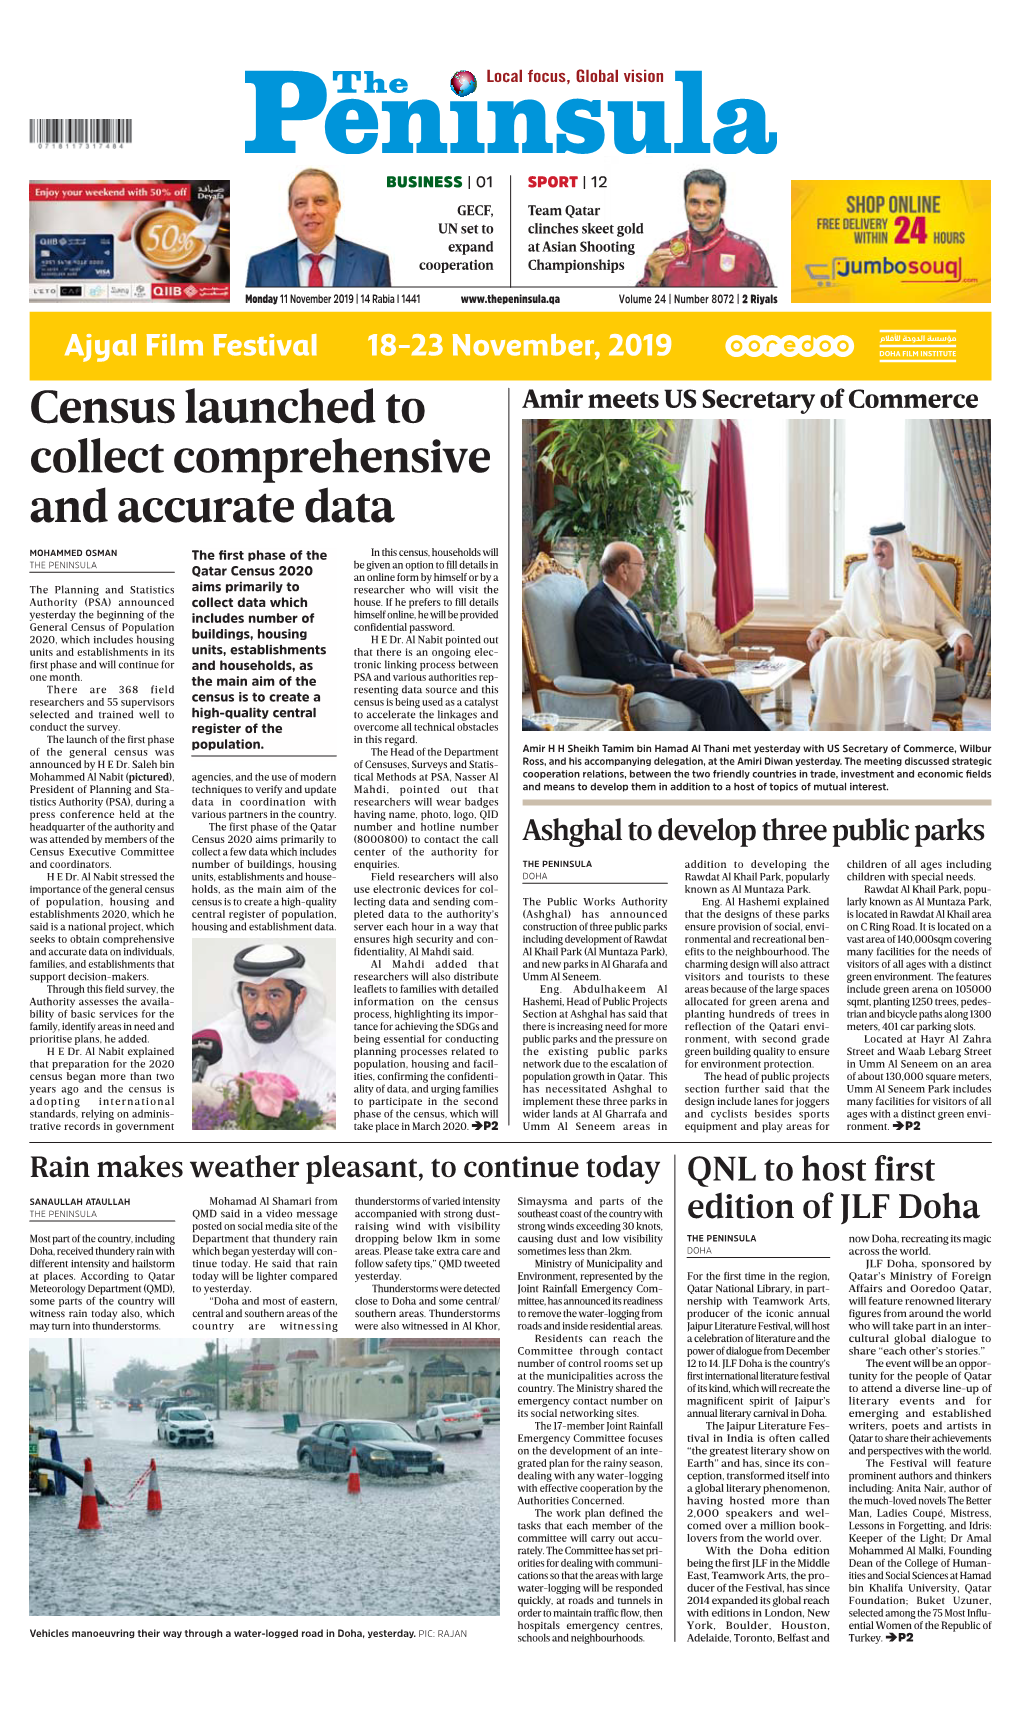 Census Launched to Collect Comprehensive and Accurate Data Soon